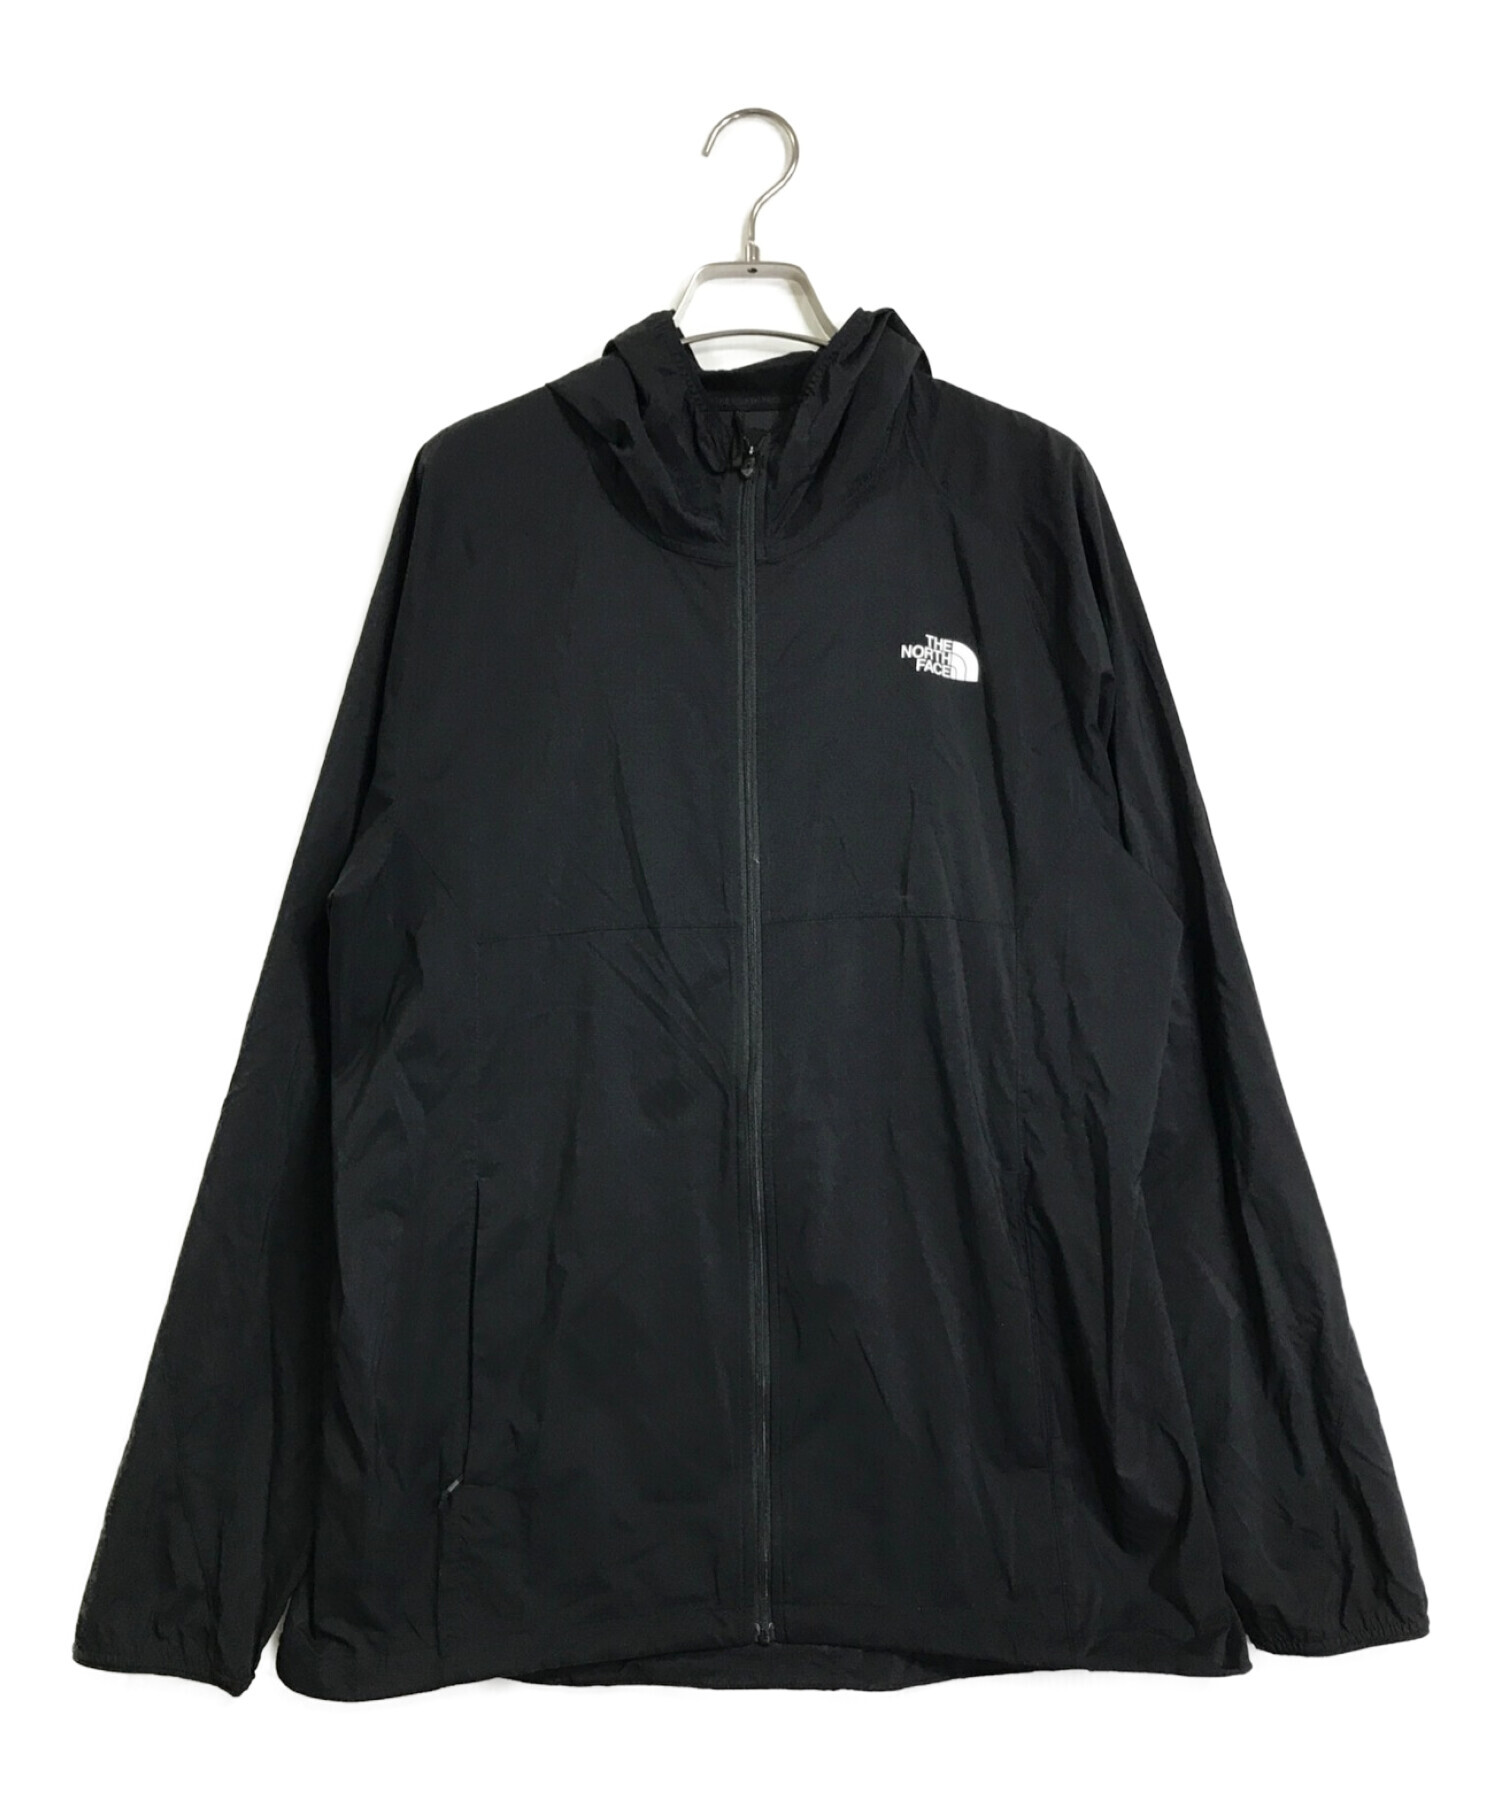 THE NORTH FACE ANYTIME WIND HOODIE Lサイズジャケット/アウター ...